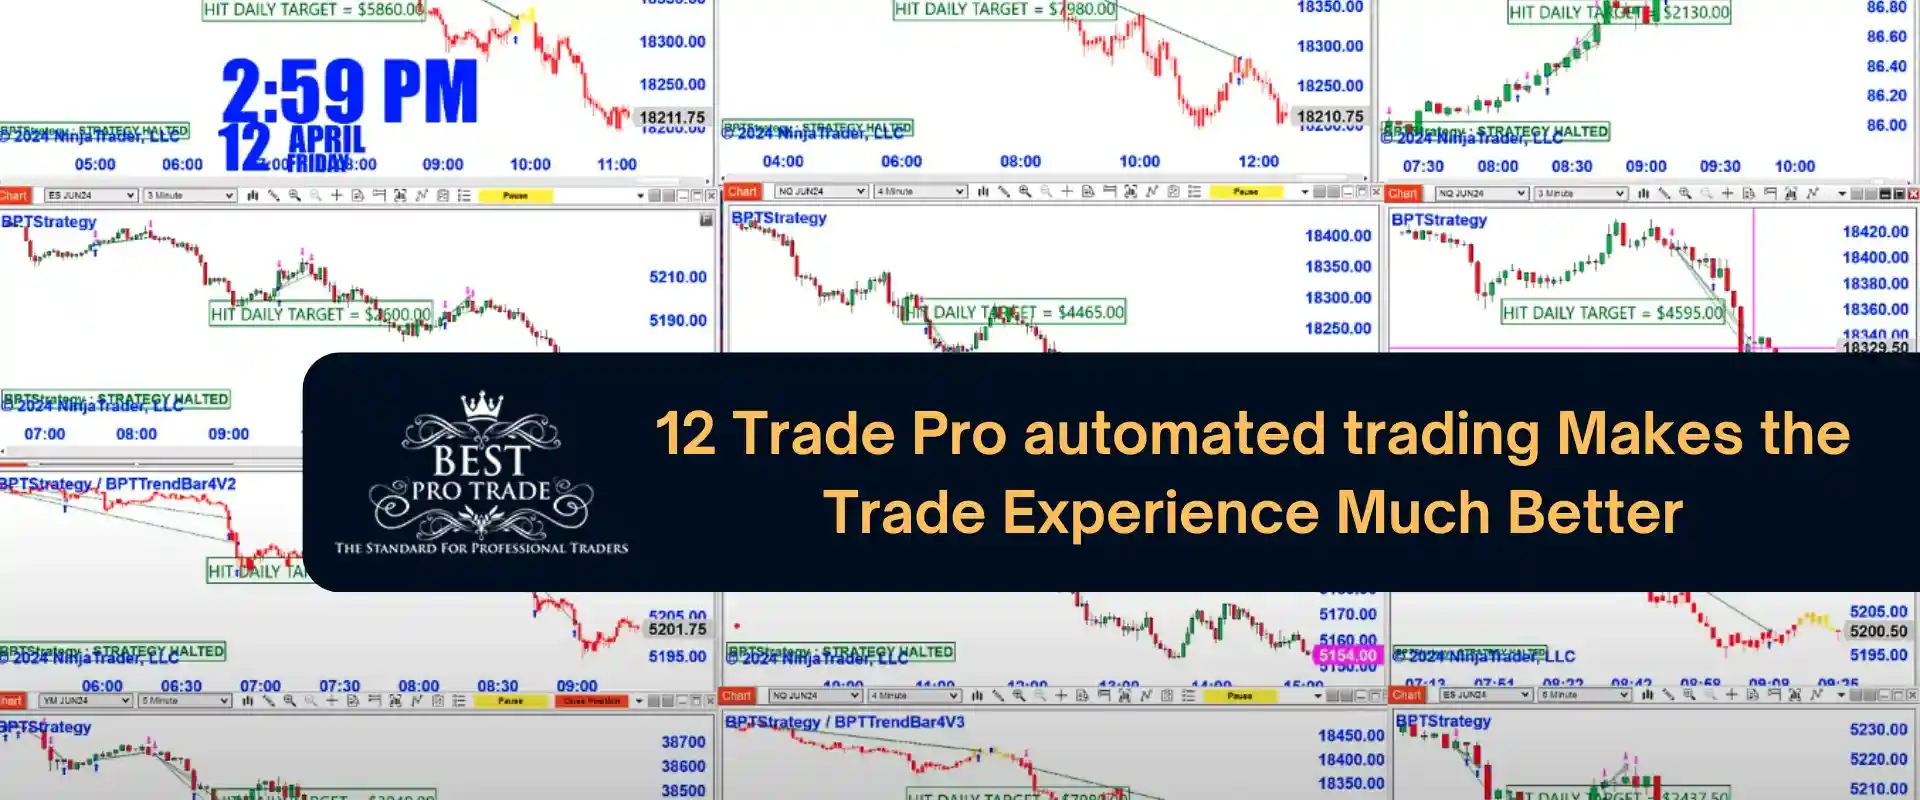 Pro automated trading